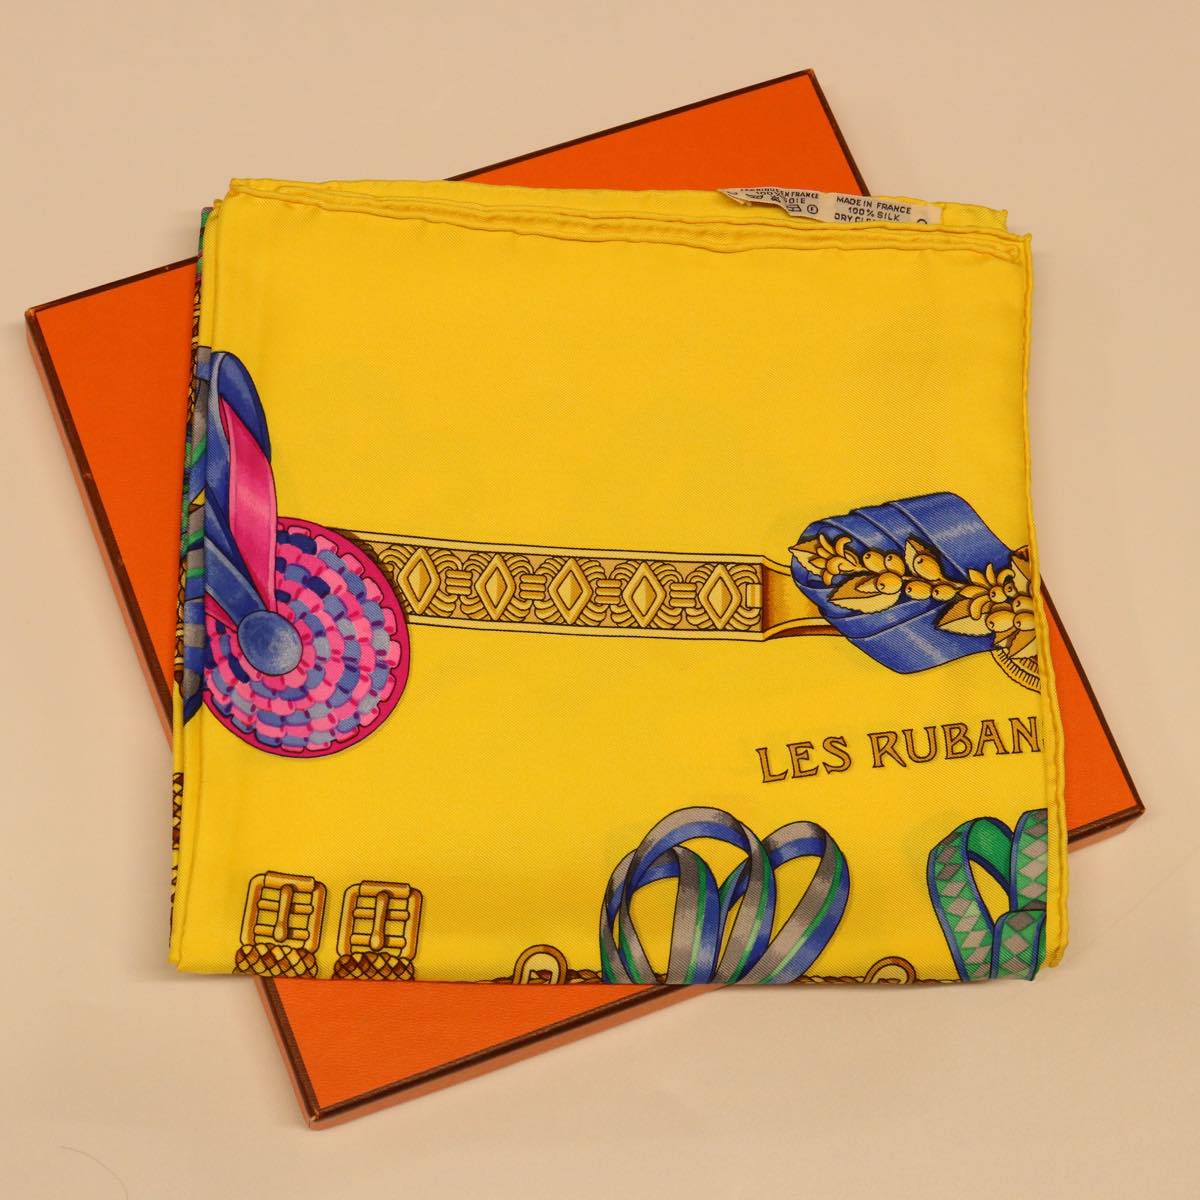 HERMES Carre 90 Scarf ”LES RUBANS DU CHEVAL” Silk Yellow Auth bs7310